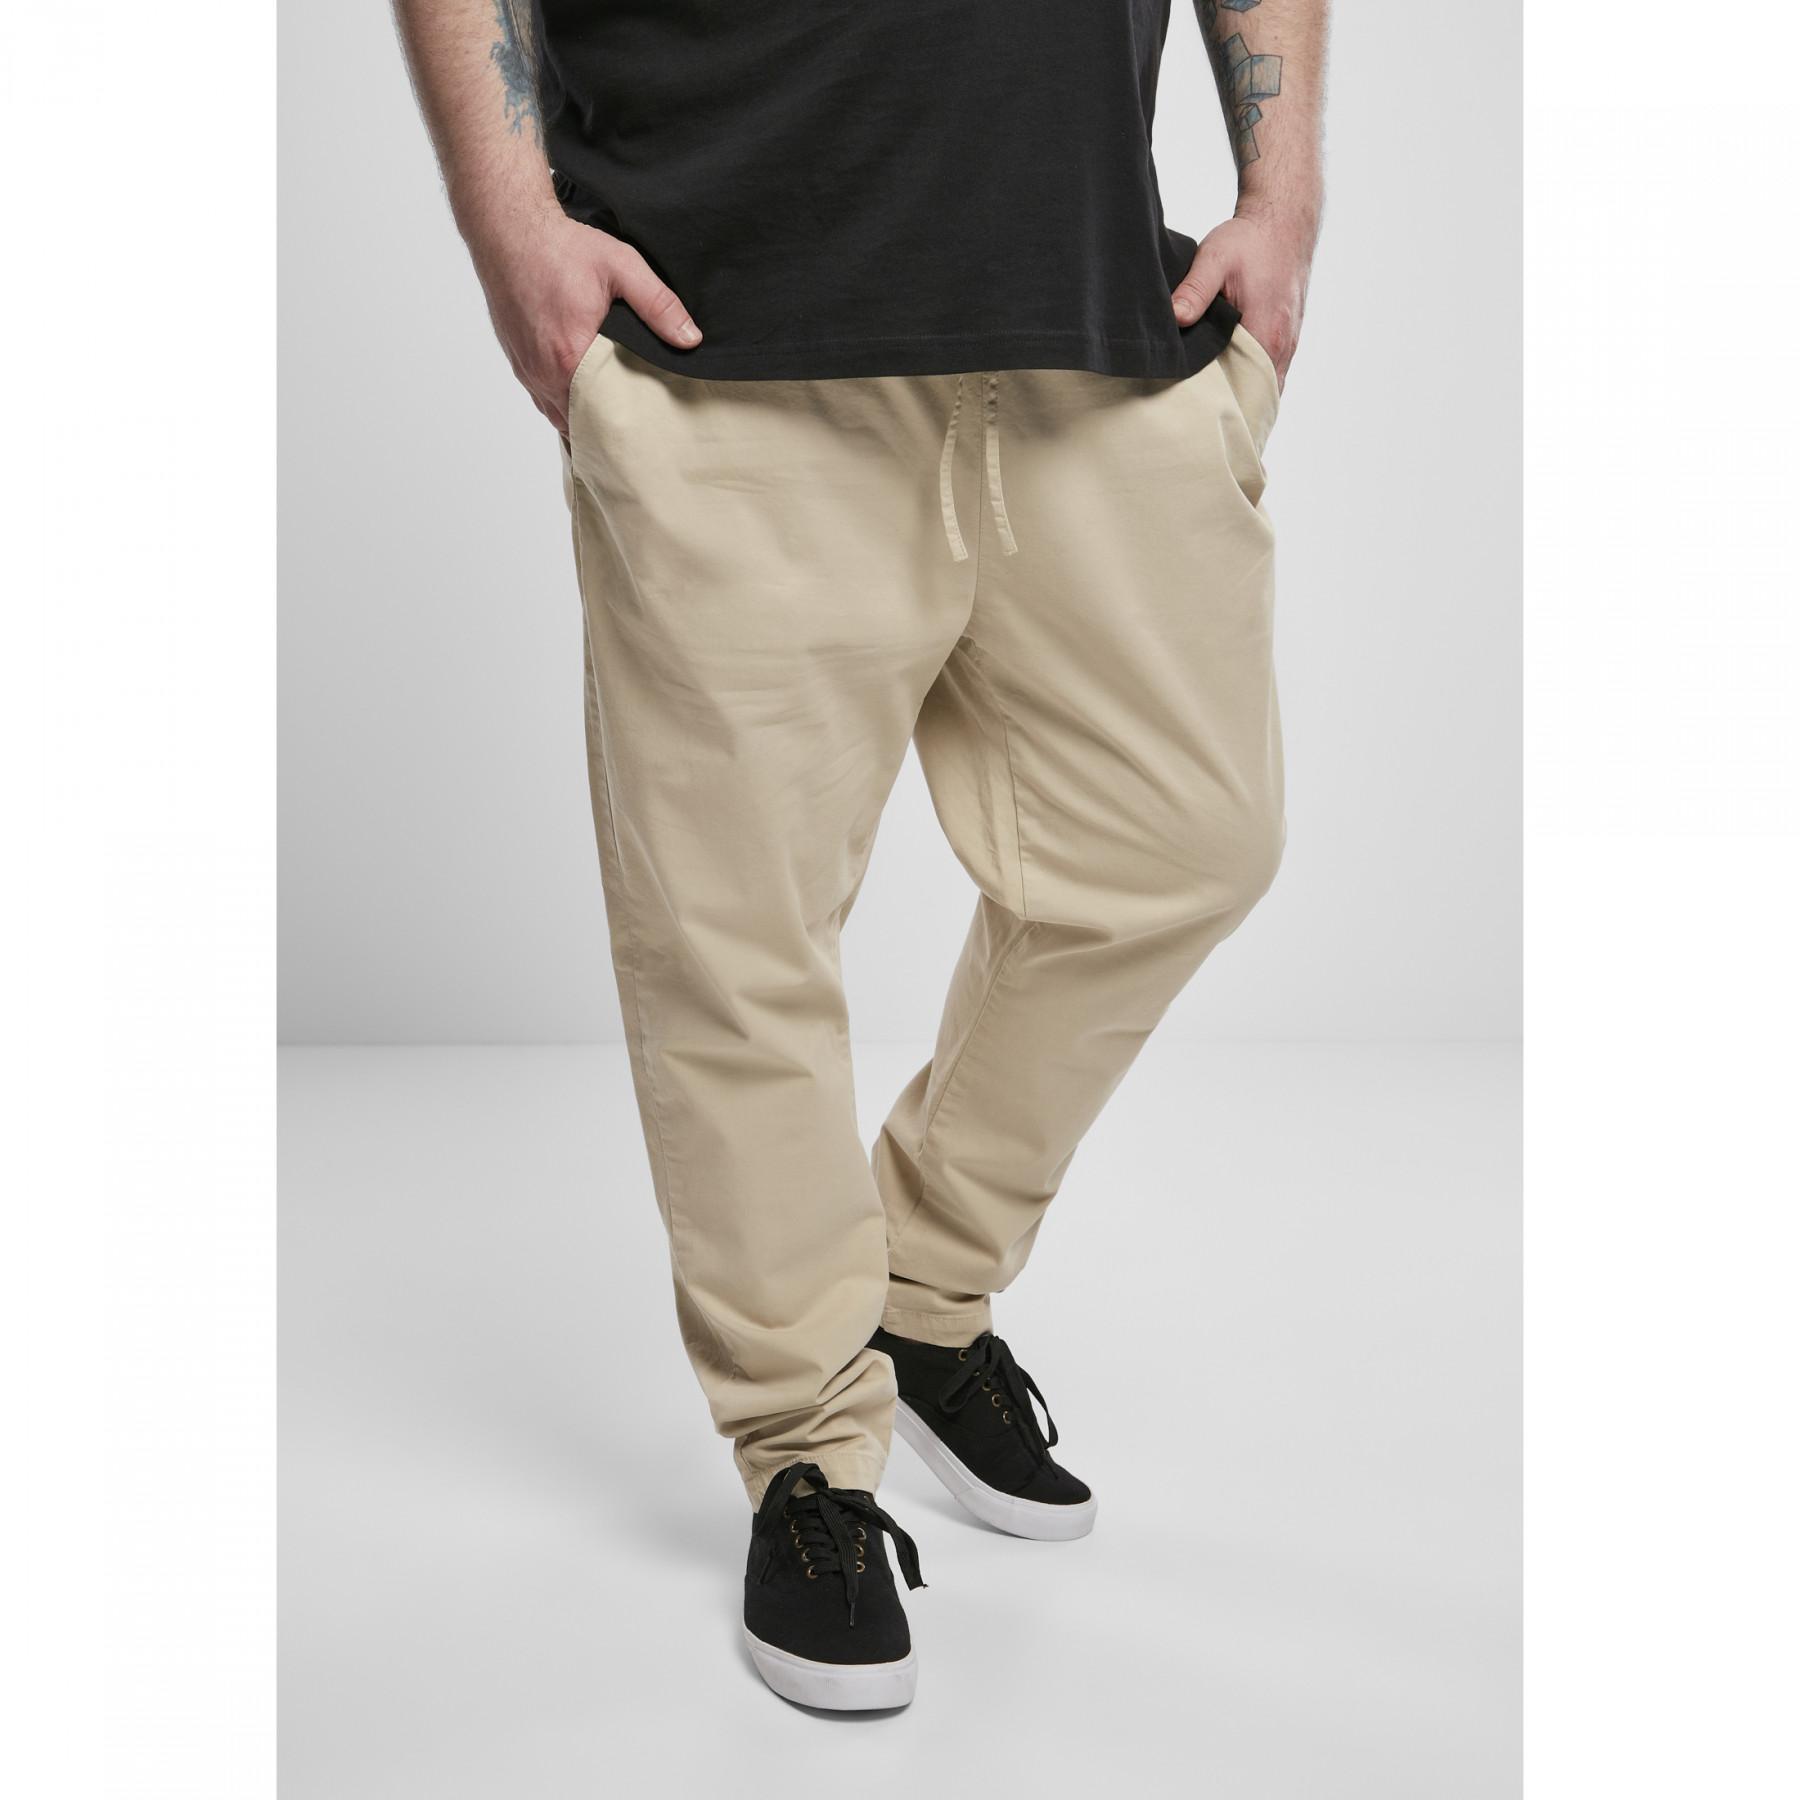 Broek Urban Classics tapered cotton jogger (grandes tailles)